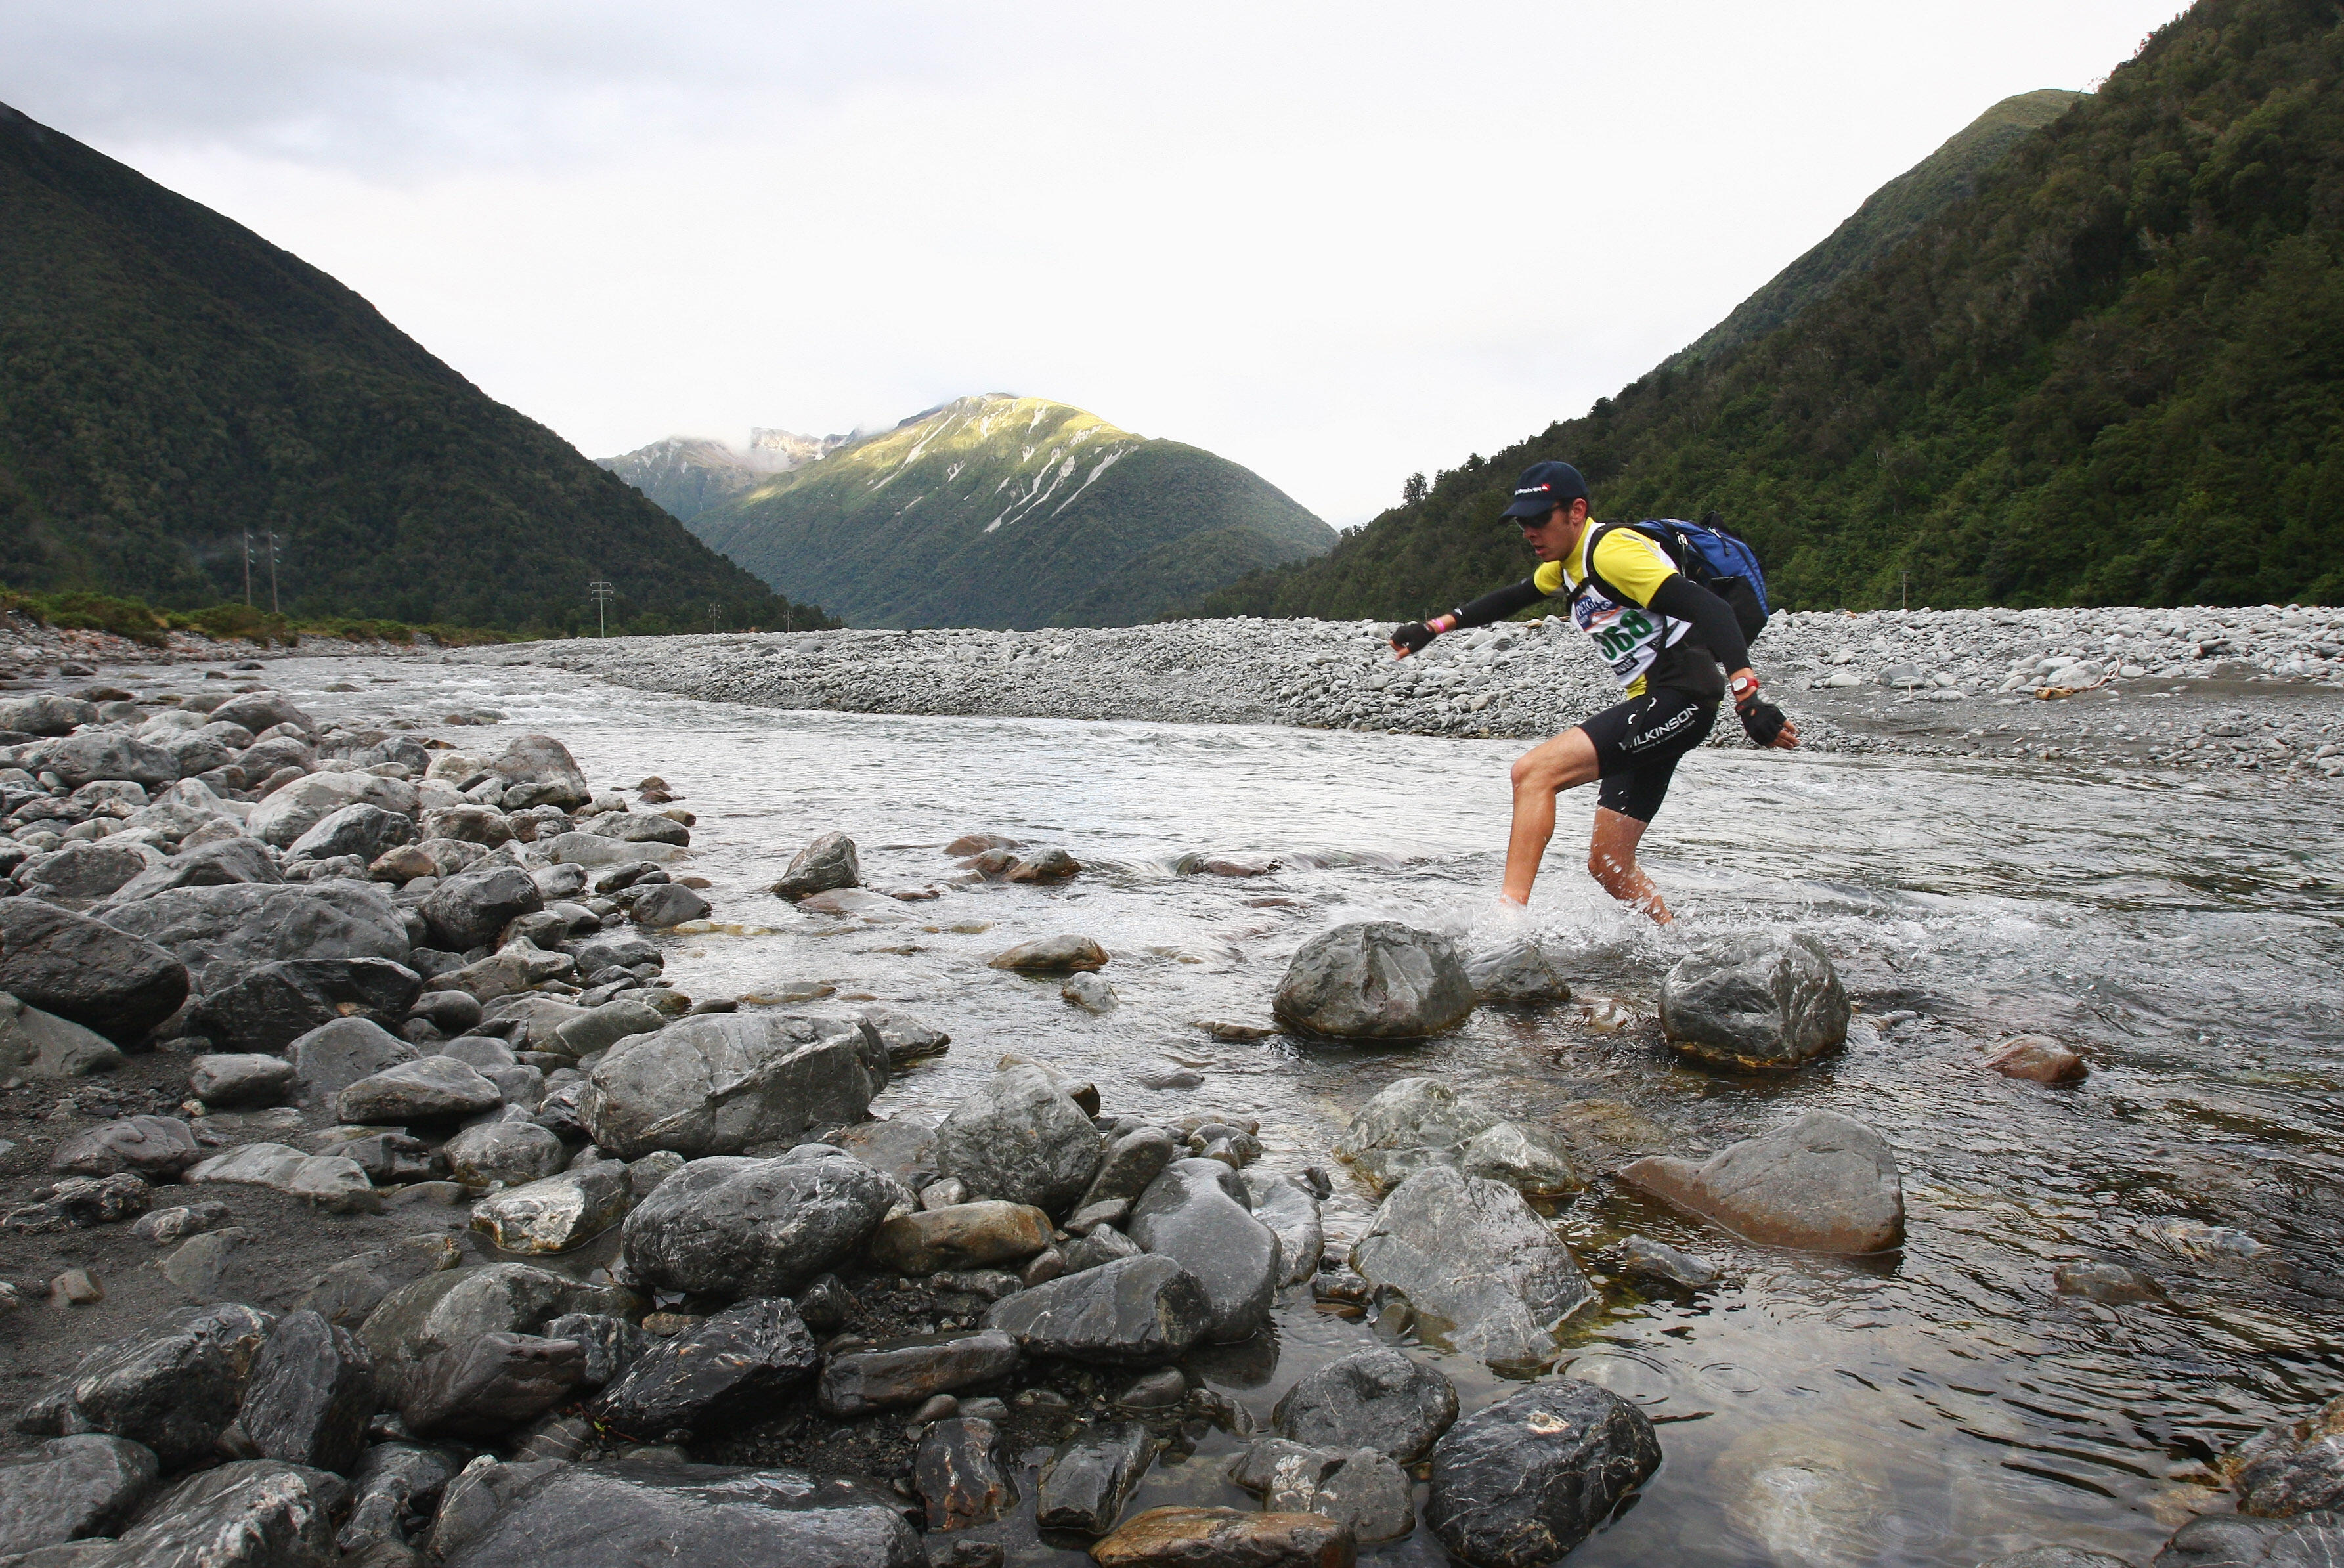 GREYMOUTH, NEW ZEALAND - FEBRUARY 13:  Stephen Rowe of Auckland competes in the individual two-day event during the Speight's Coast to Coast race at Deception's Bridge on February 13, 2009 on the West Coast, New Zealand.  (Photo by Sandra Mu/Getty Images)